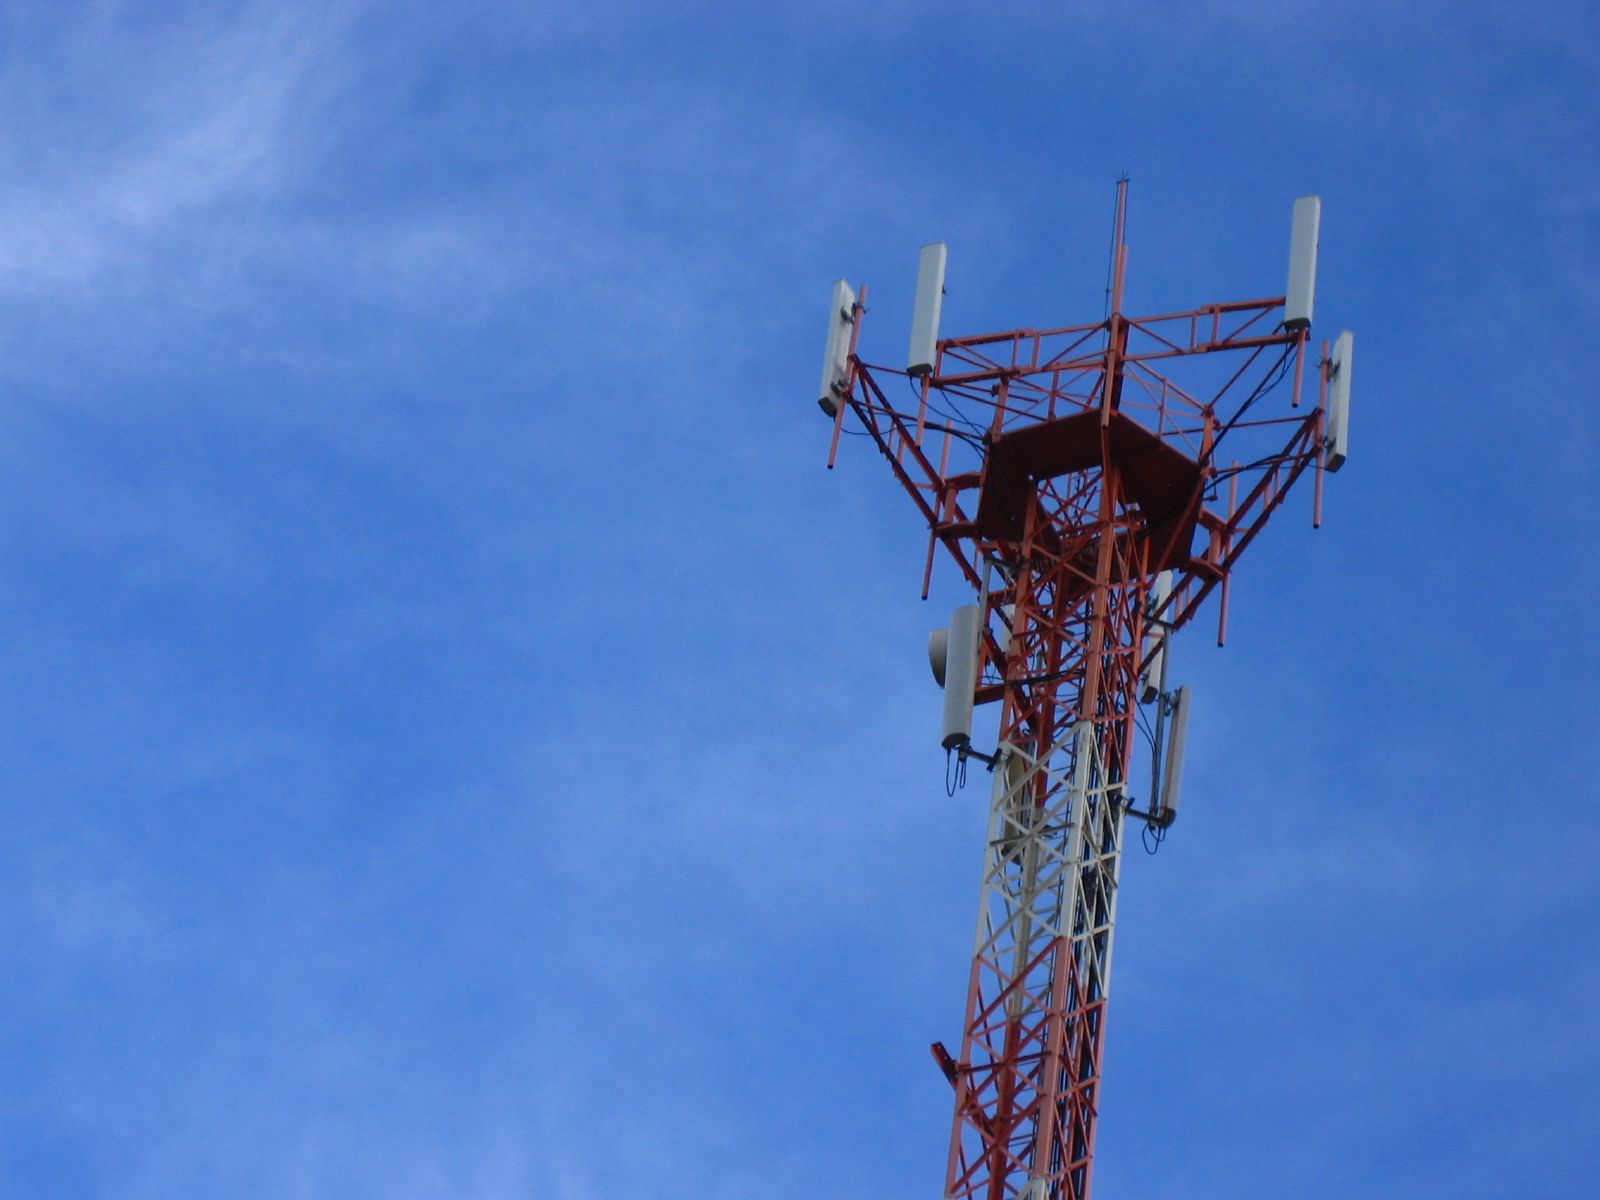 a cell tower stands tall against a bright blue sky